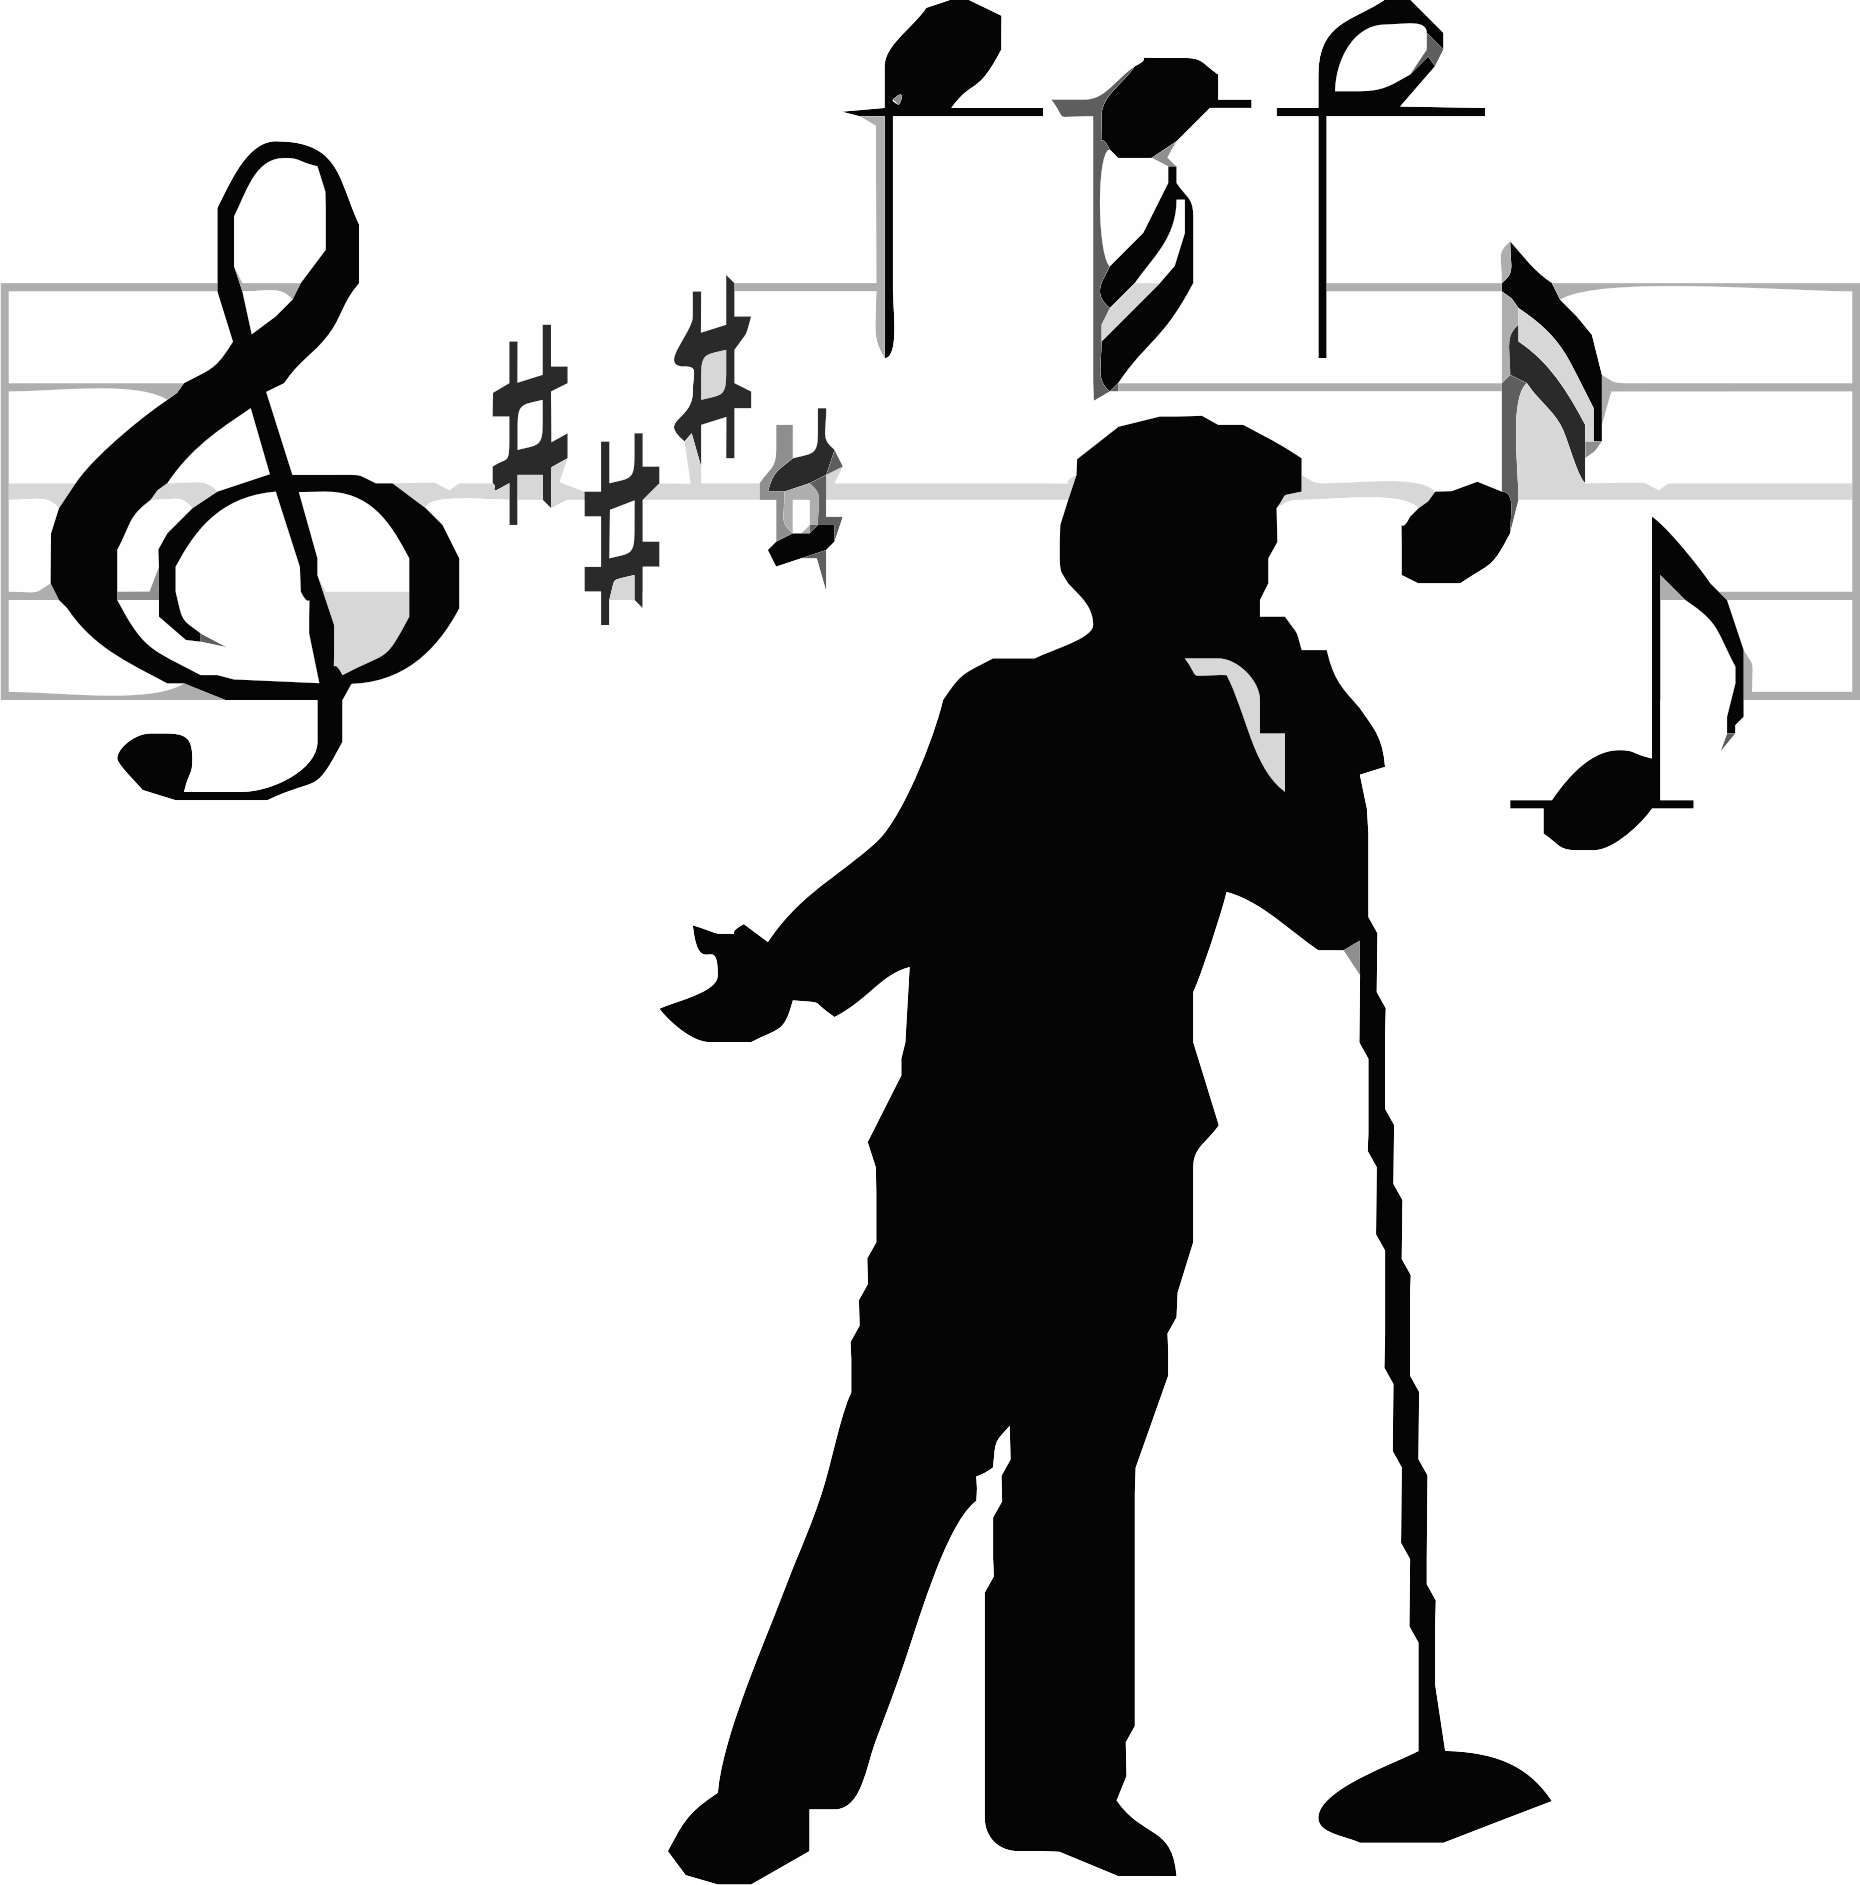 File:Singer icon transparent.png - Wikimedia Commons